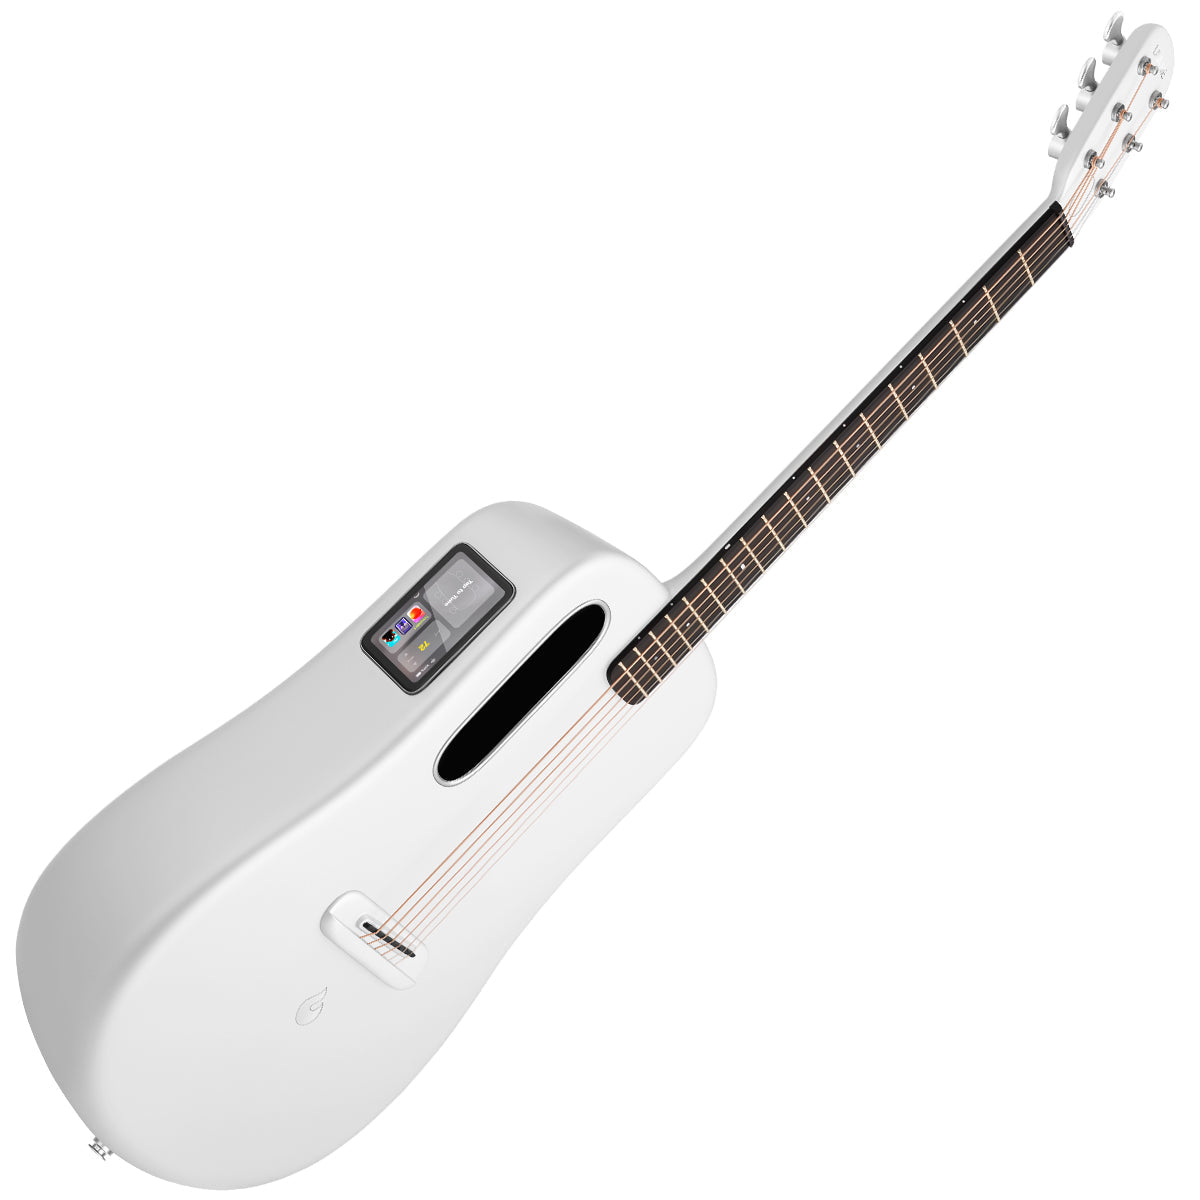 LAVA ME4 Carbon 36" with AirFlow Bag ~ White, Acoustic Guitar for sale at Richards Guitars.